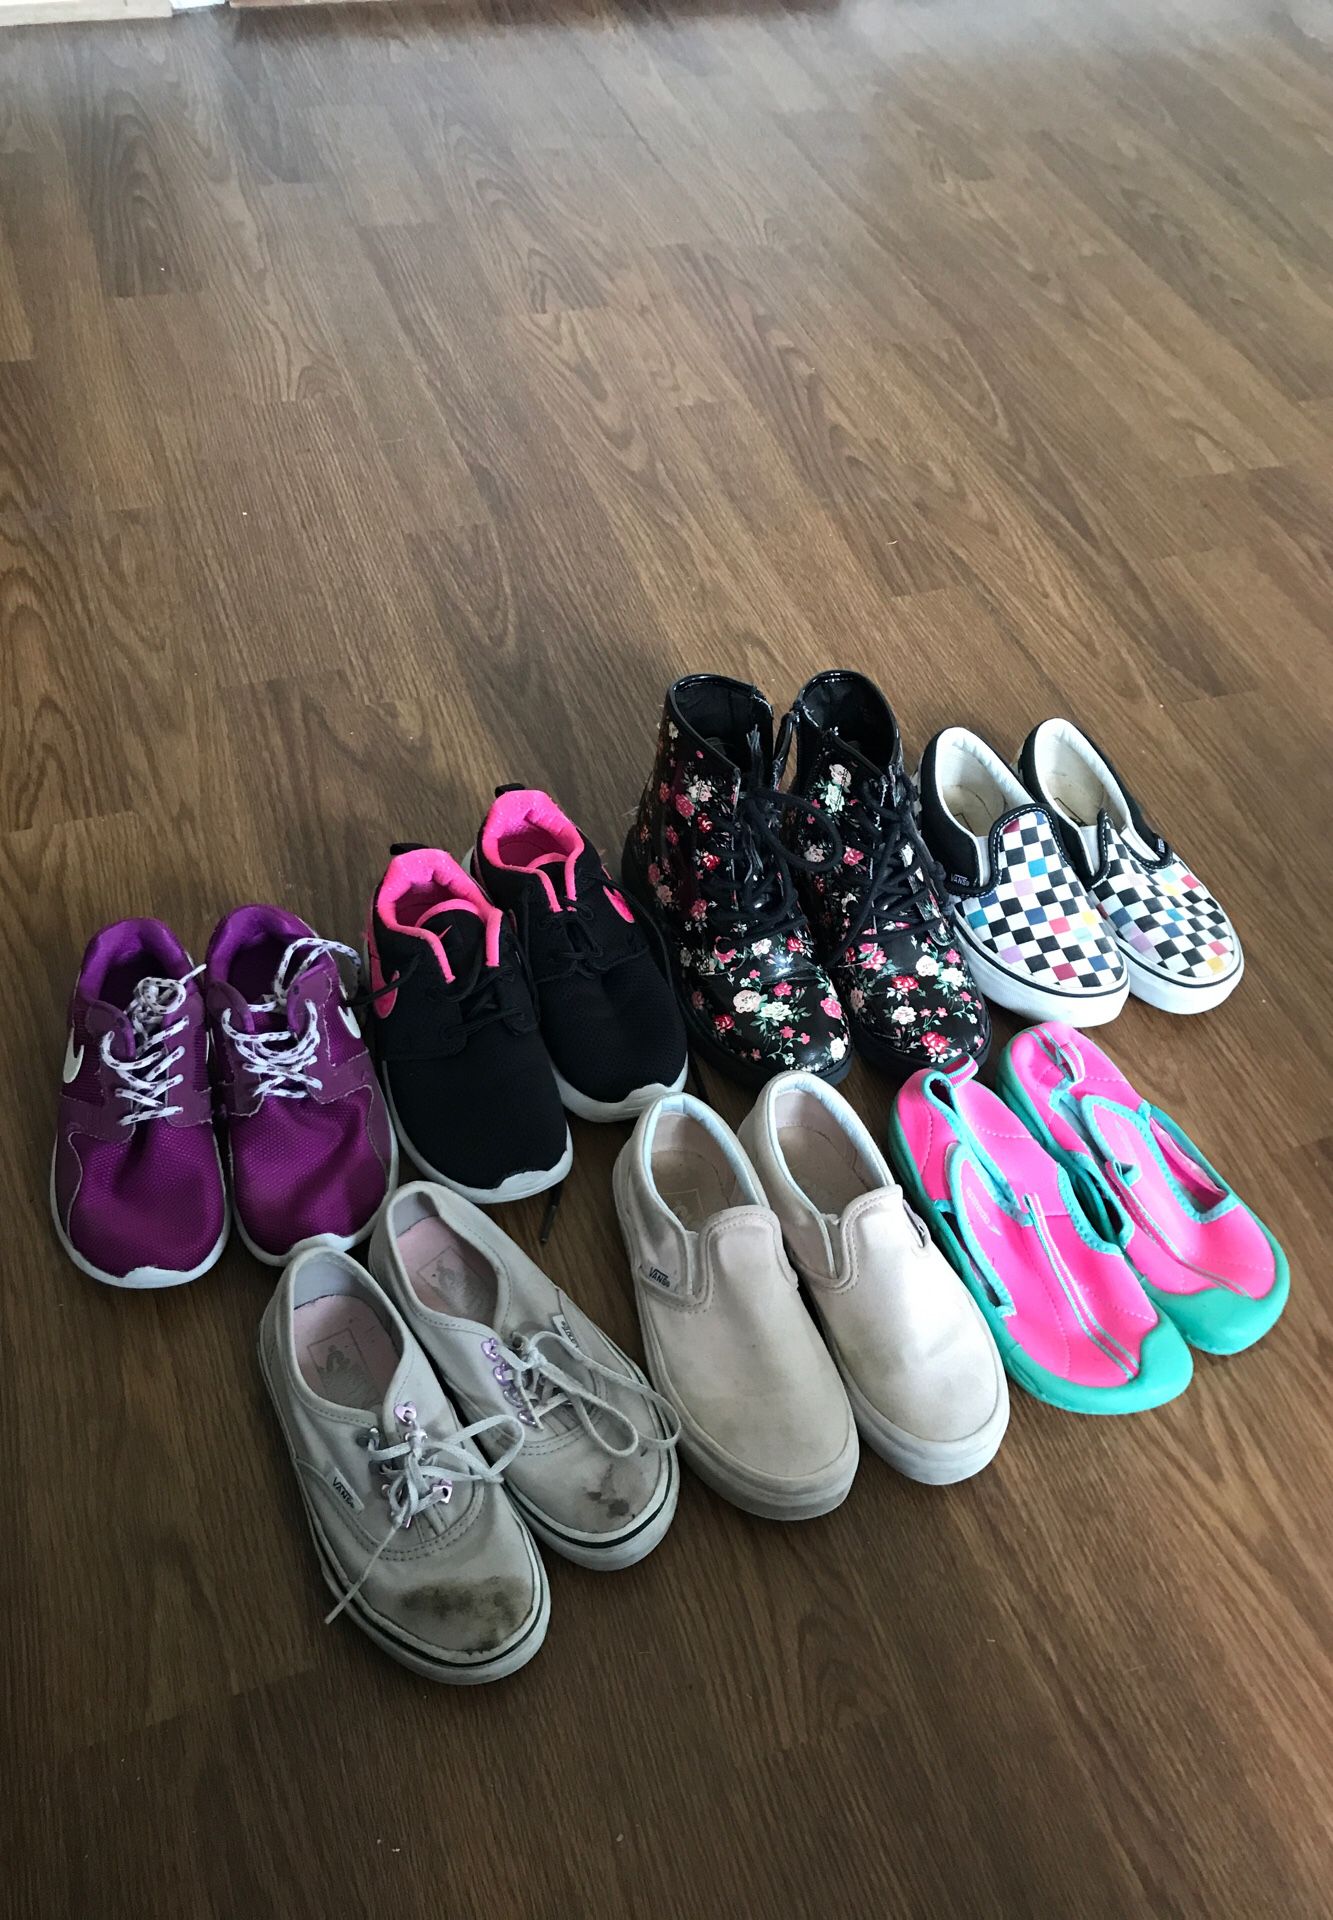 Children’s shoes Nike’s, Vans, and more!